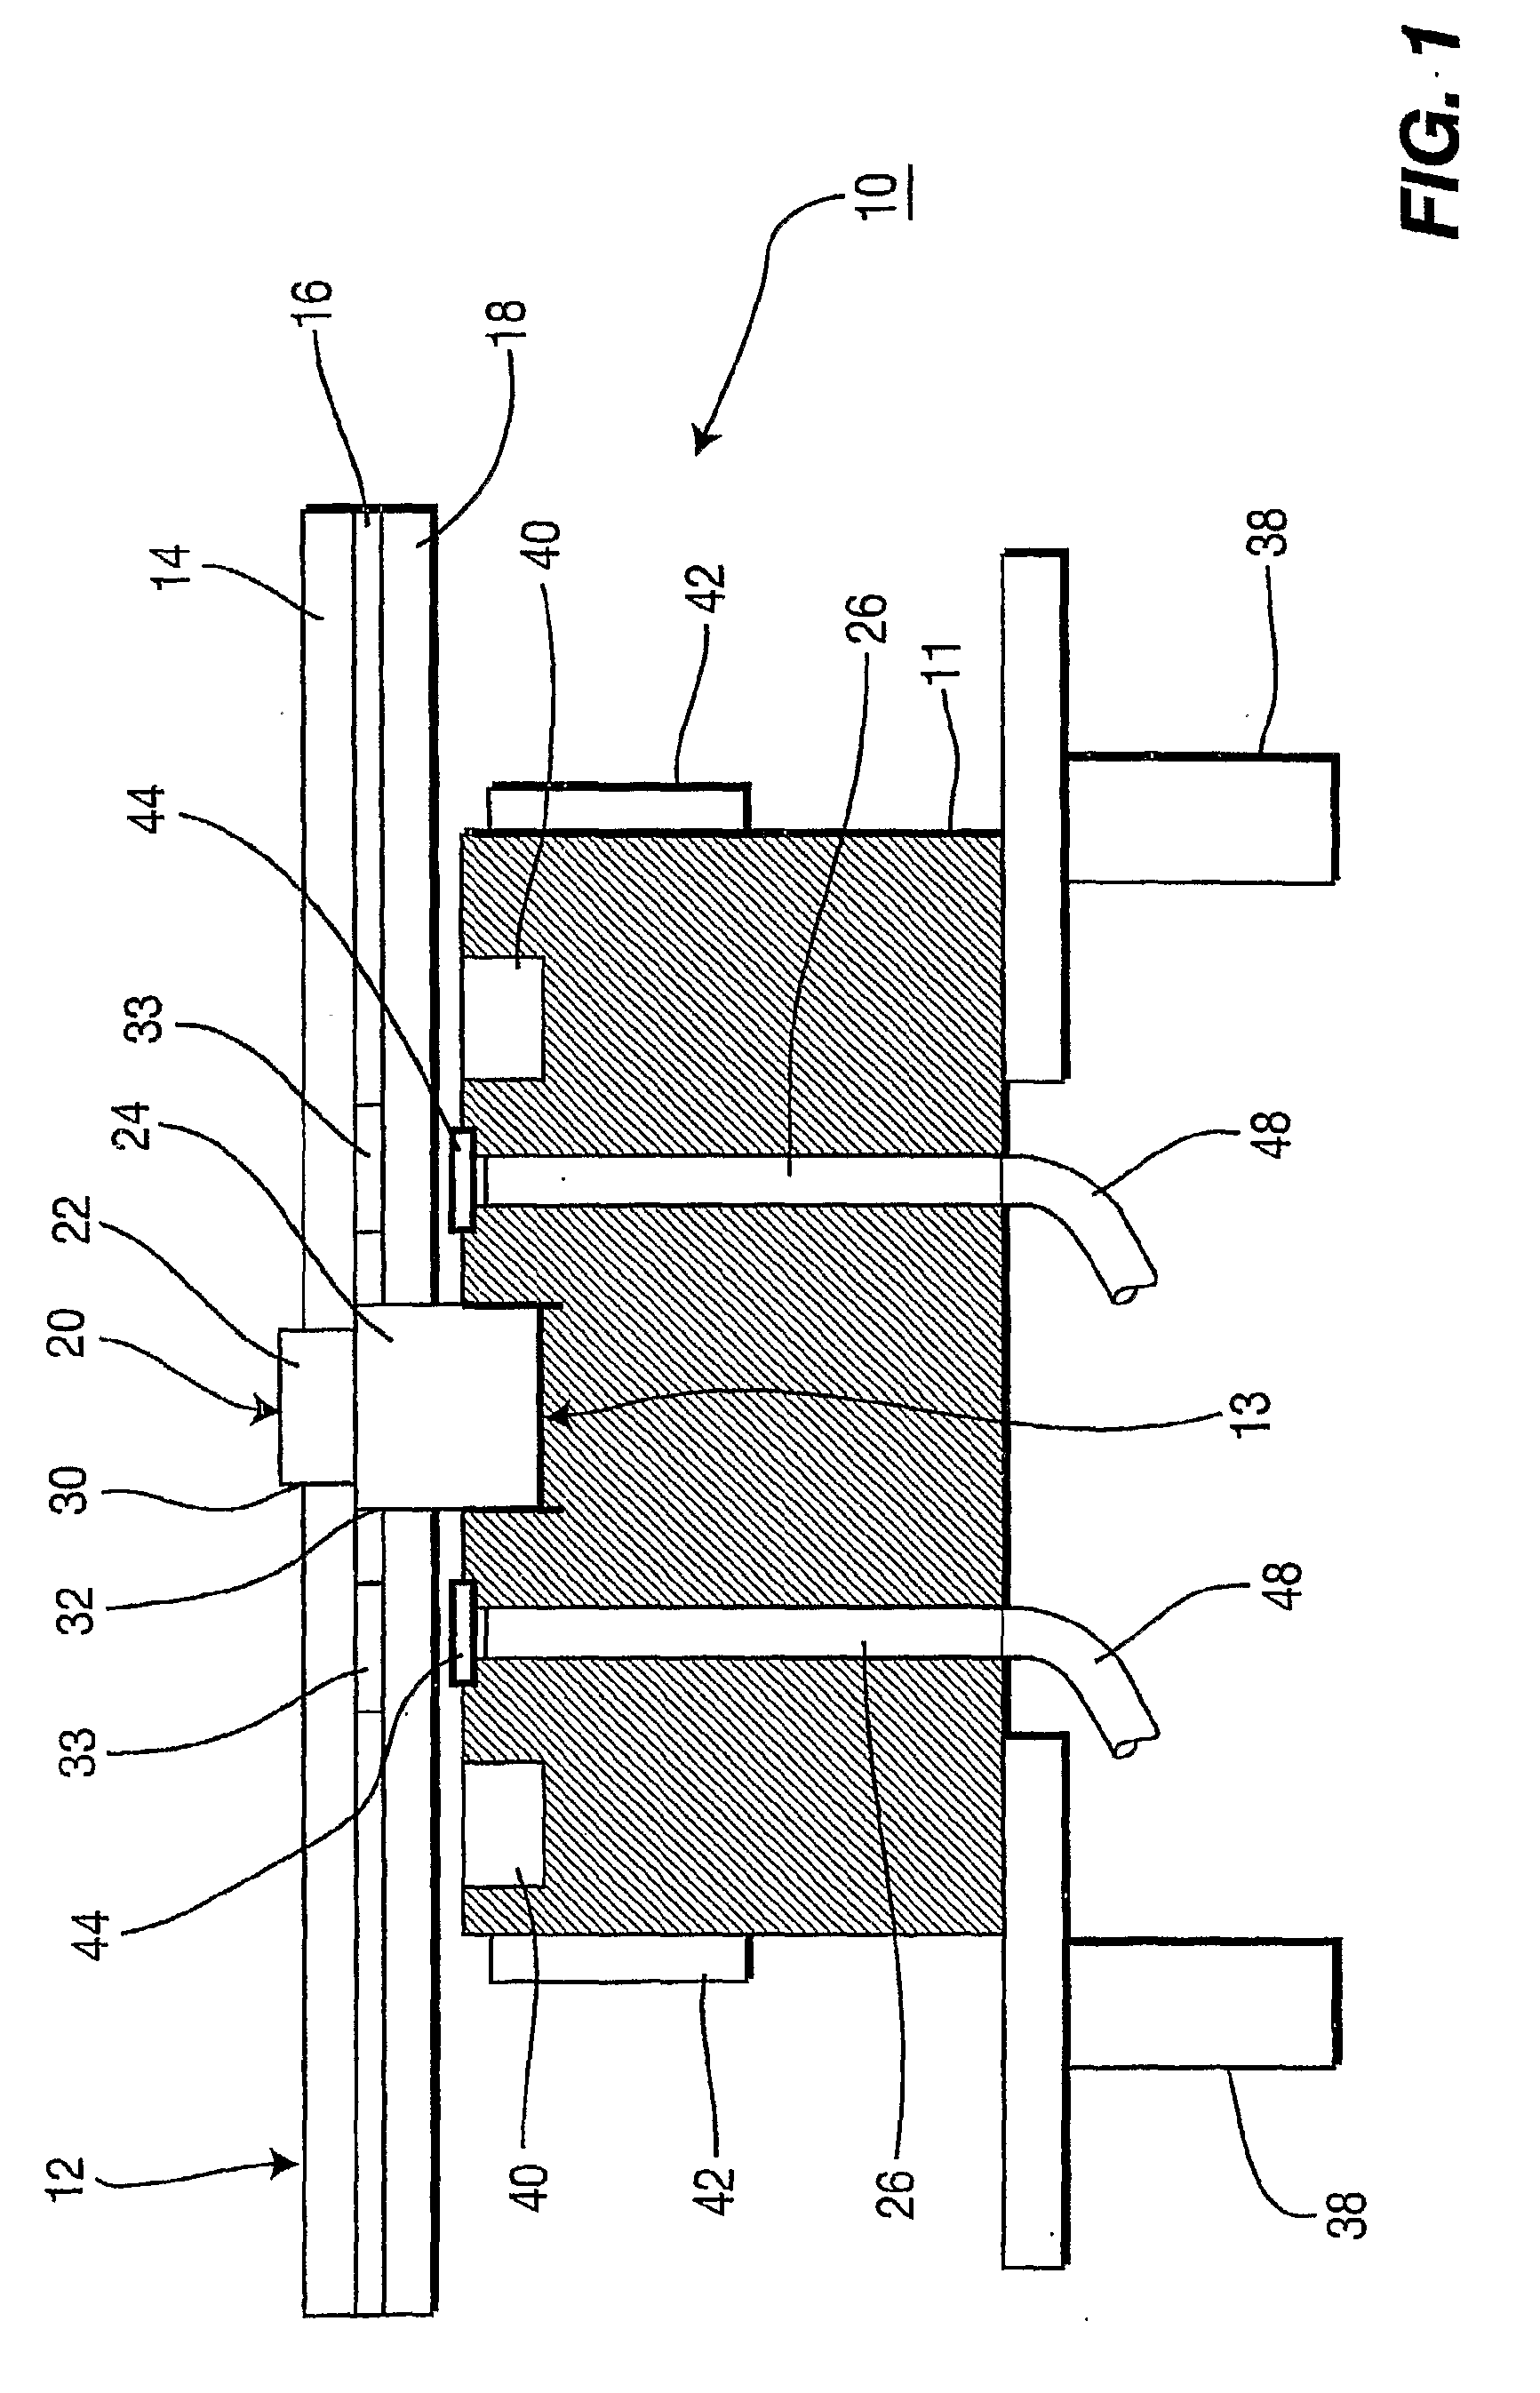 Apparatus and Method for Improving Center Hole Radial Runout Control in Optical Disk Manufacturing